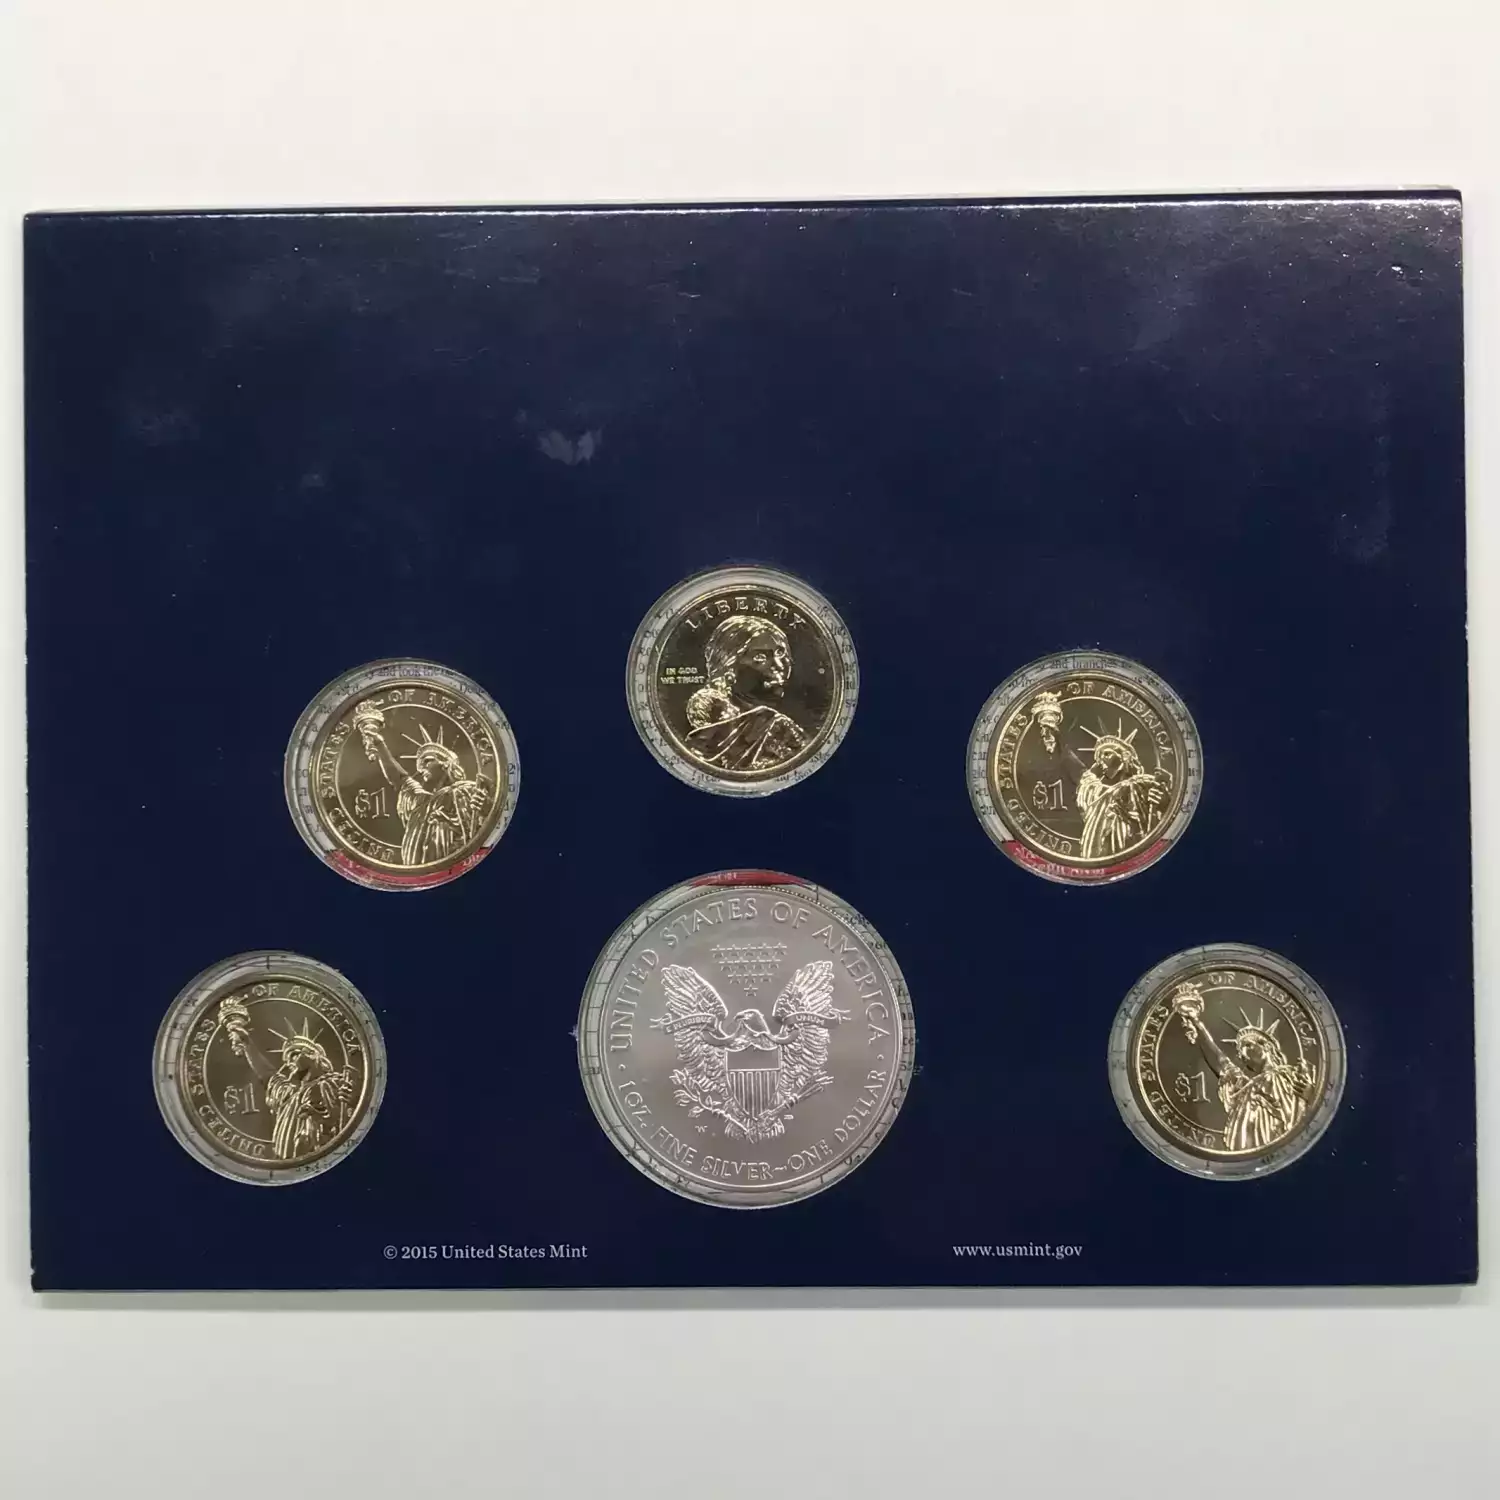 2015 Annual Uncirculated Dollar Coin Set incl W Burnished Silver Eagle - US Mint (2)